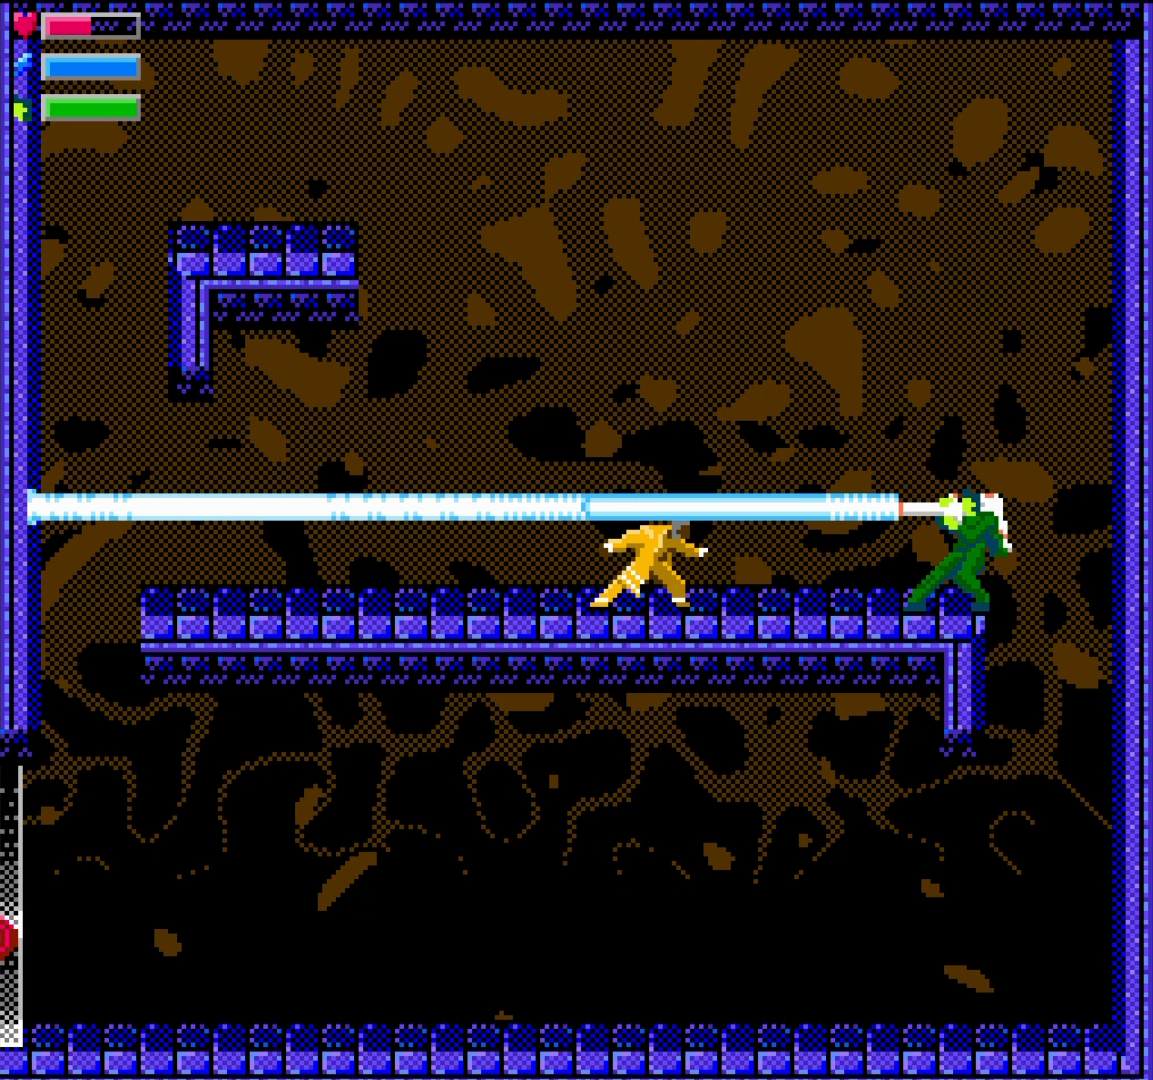 The firefighter player character dodges a deadly laser bean from the level's boss.